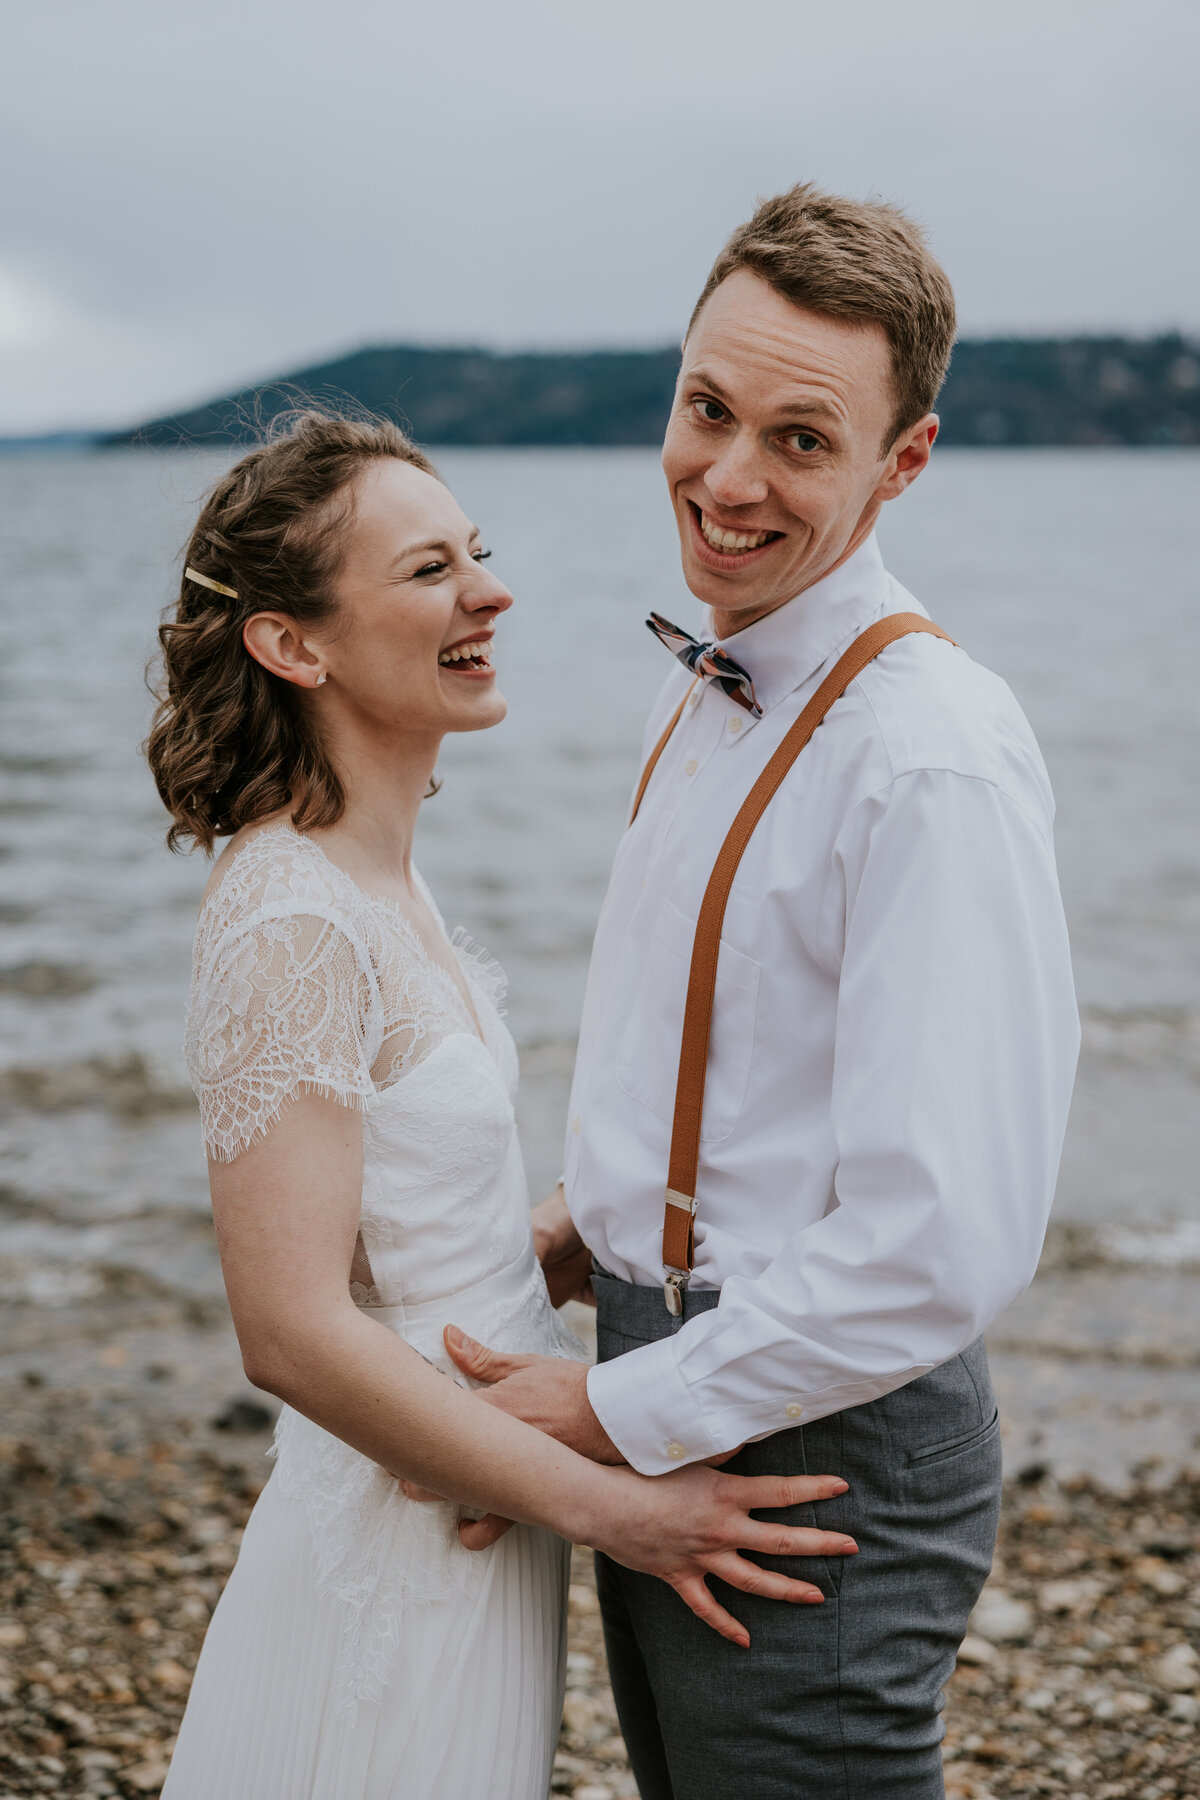 Bride and groom laugh together while standing on beach of Coeur d'Alene lake.